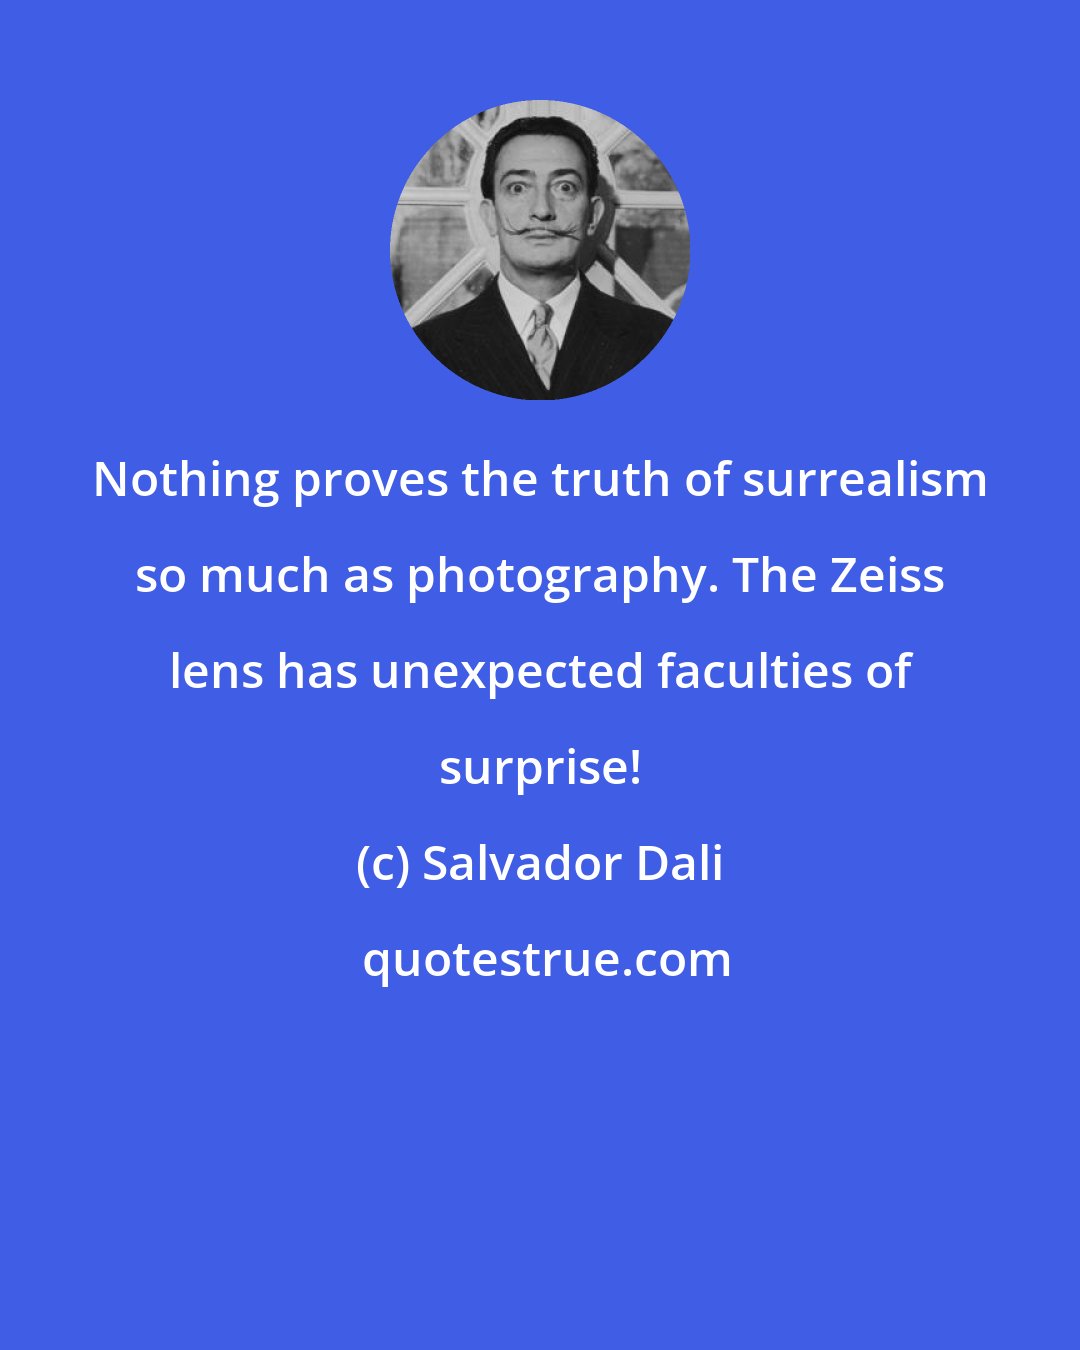 Salvador Dali: Nothing proves the truth of surrealism so much as photography. The Zeiss lens has unexpected faculties of surprise!